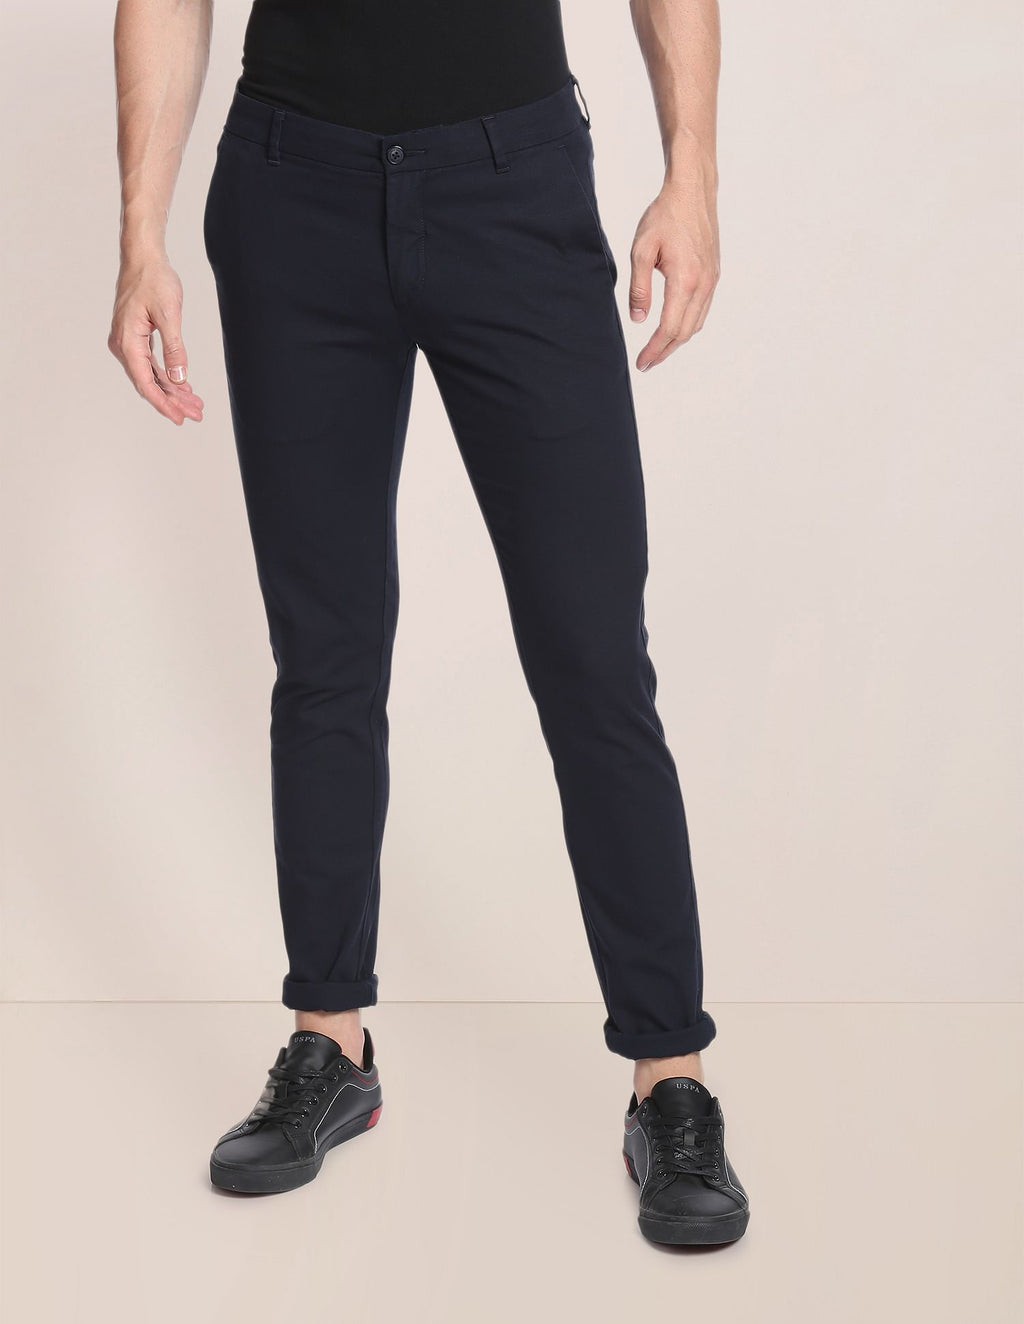 Buy U.S. Polo Assn. Austin Trim Fit Textured Casual Trousers - NNNOW.com